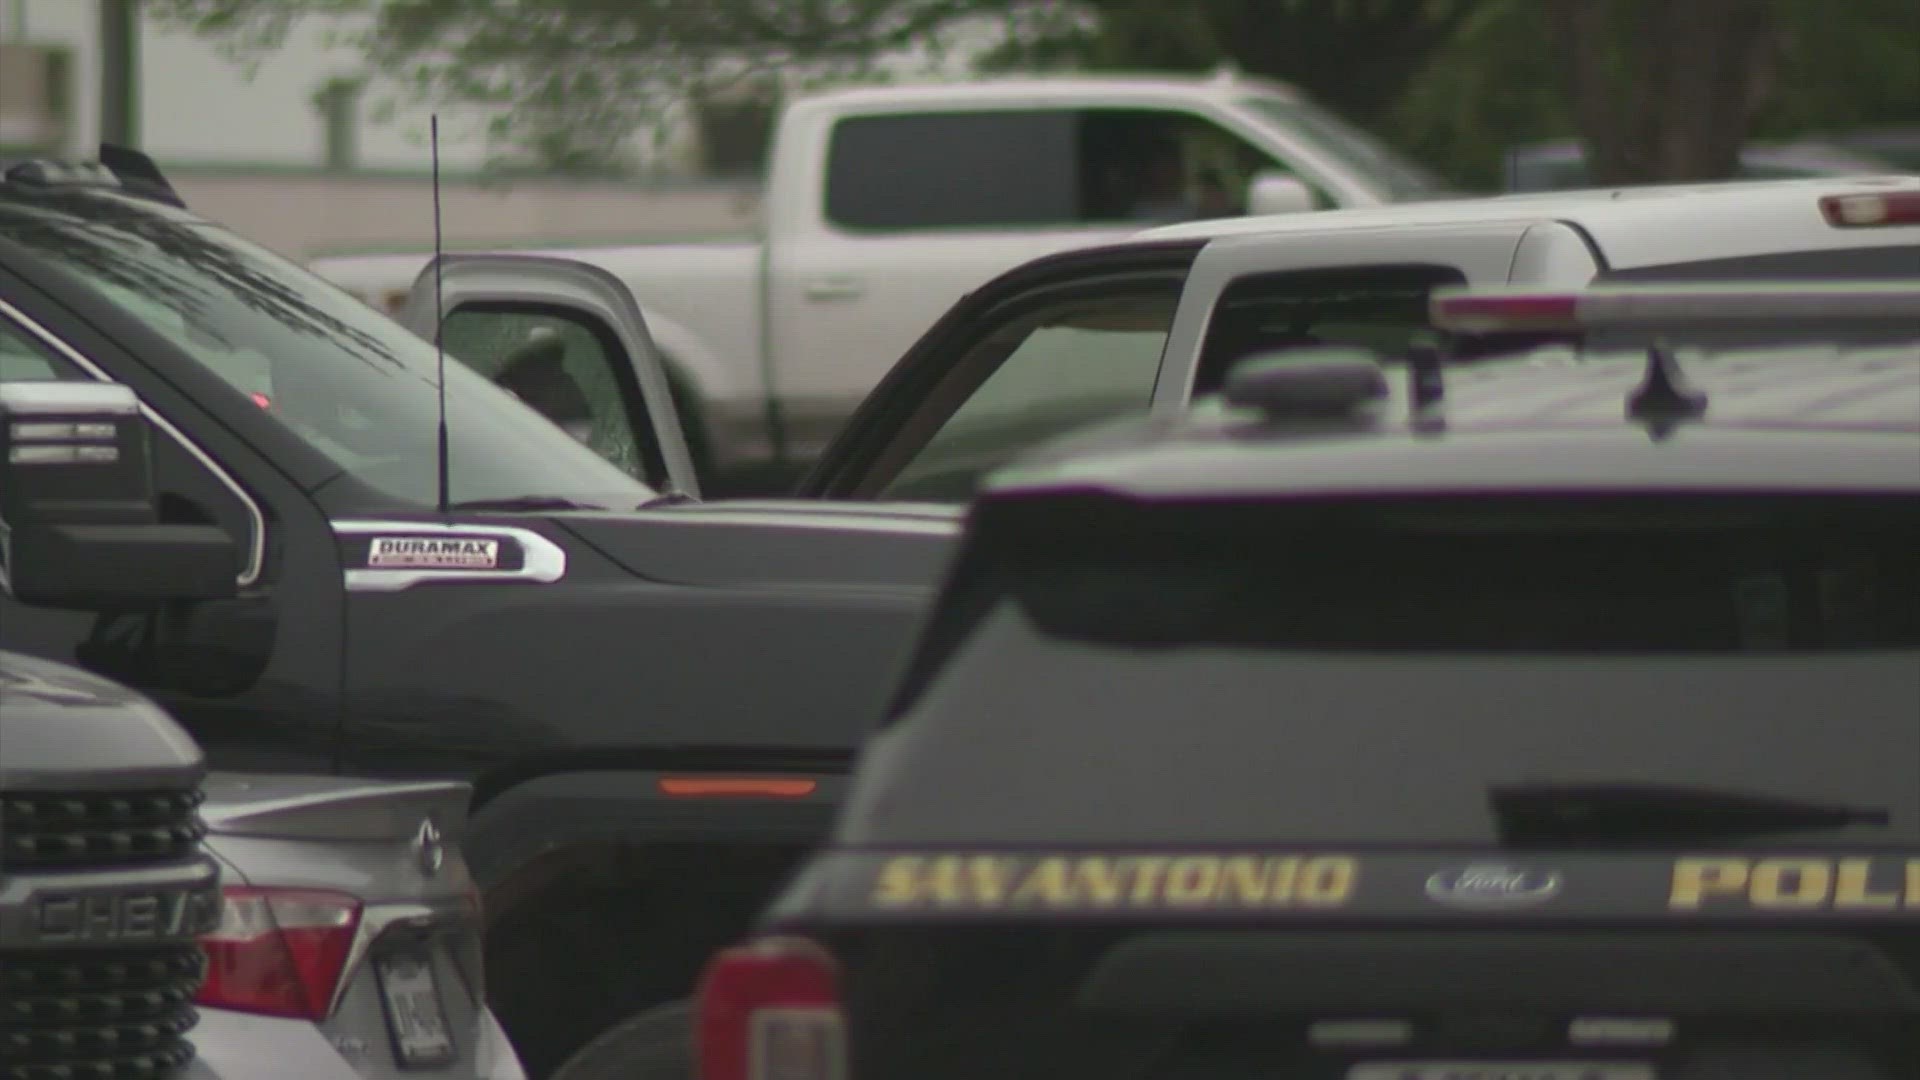 San Antonio police said the truck theft ended in a deadly shooting after one of the owners tracked down and killed the suspect using an AirTag.